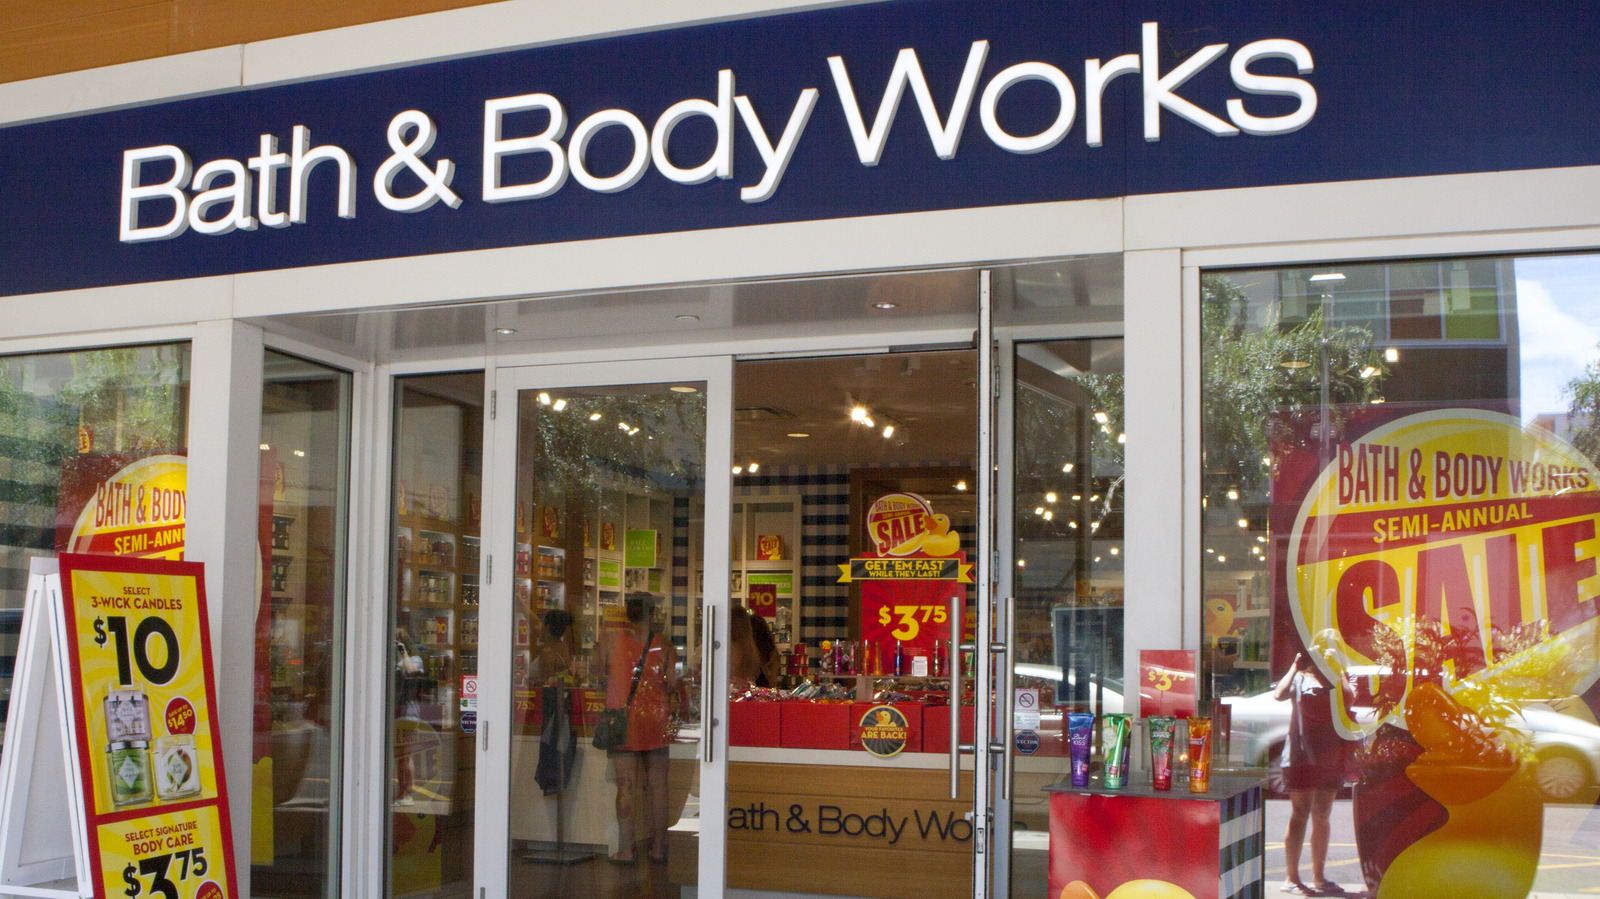 Bath & Body Works Semi-Annual Sale is LIVE and There is a Coupon!